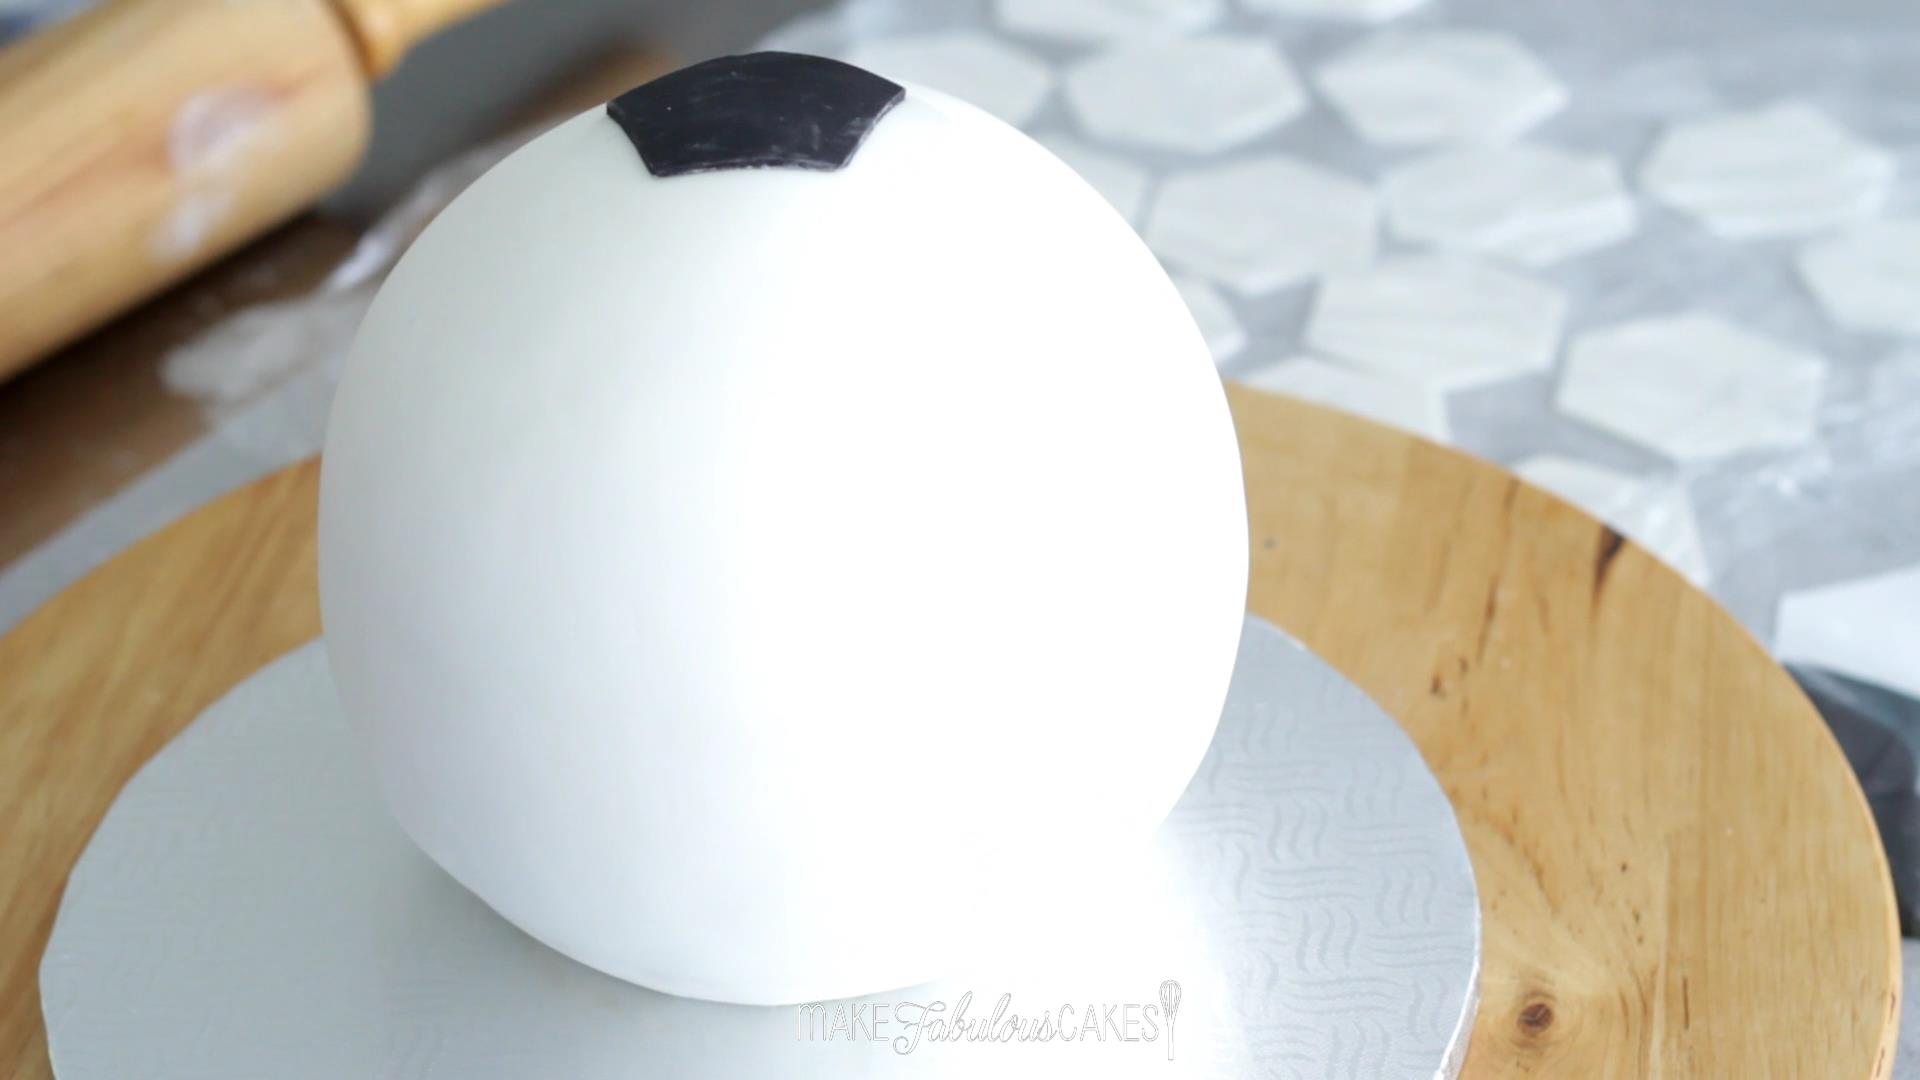 adding the soccer ball pattern on the cake